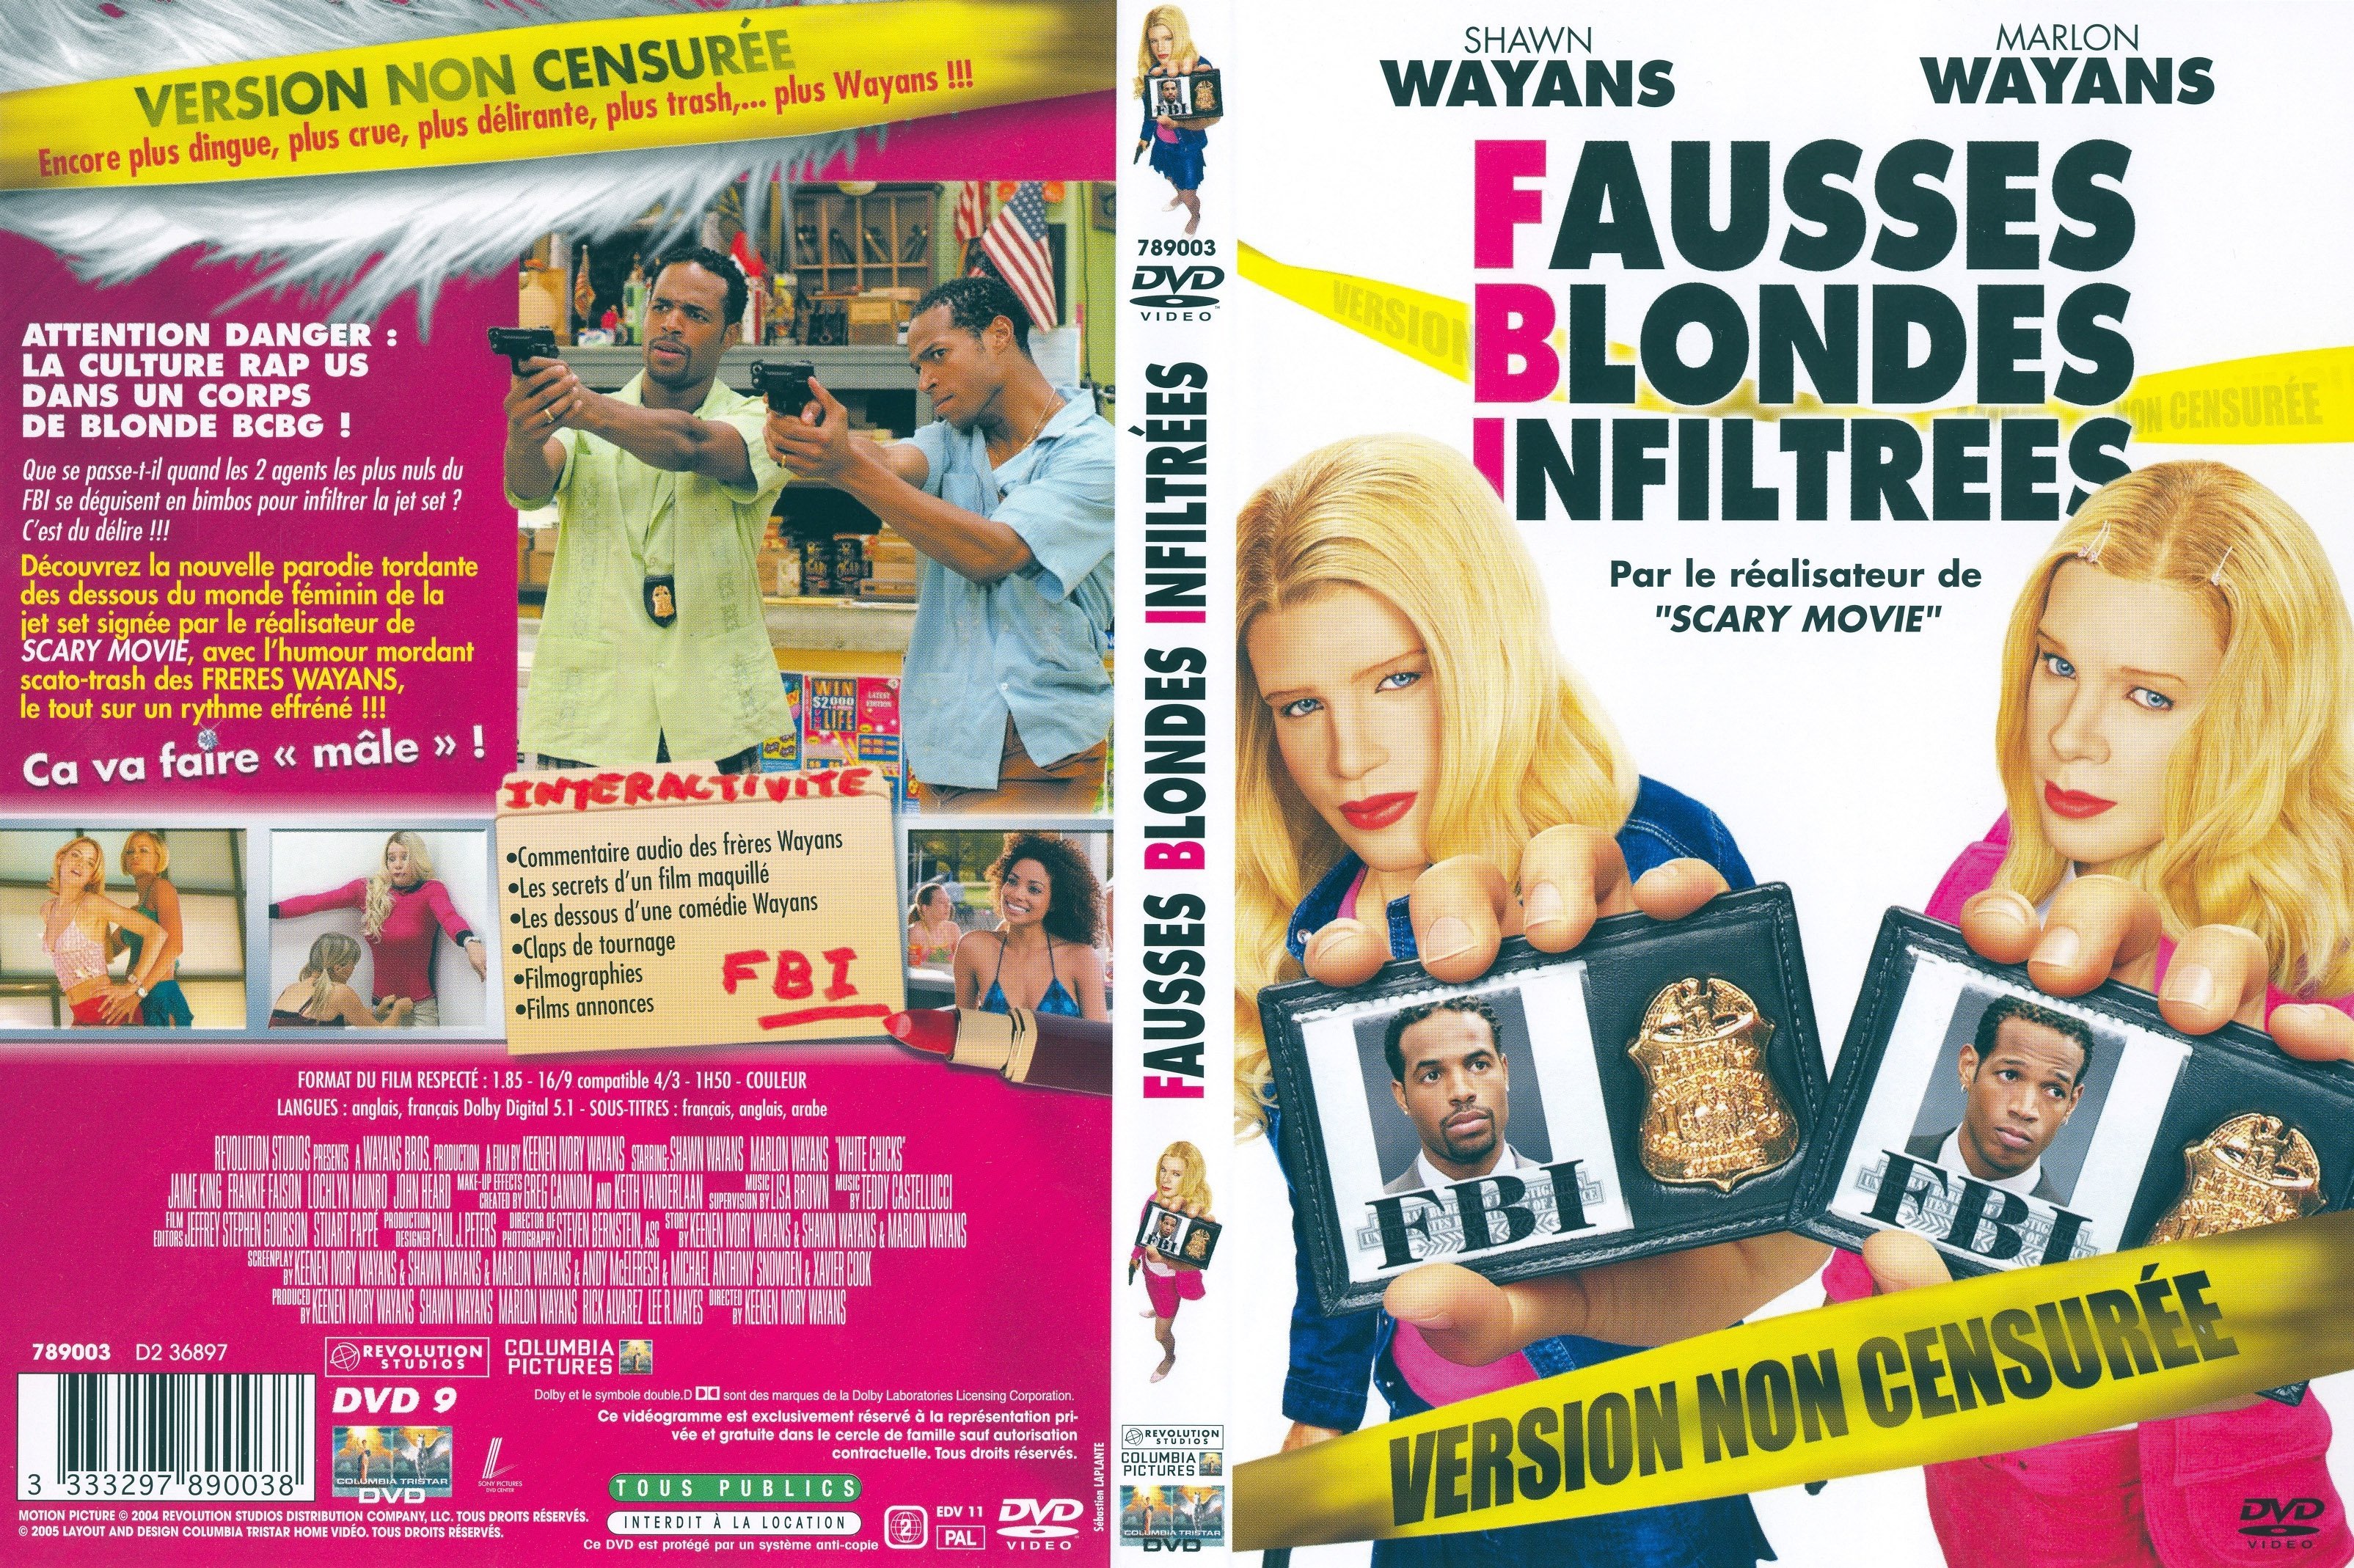 Jaquette DVD F.B.I. Fausses Blondes Infiltres